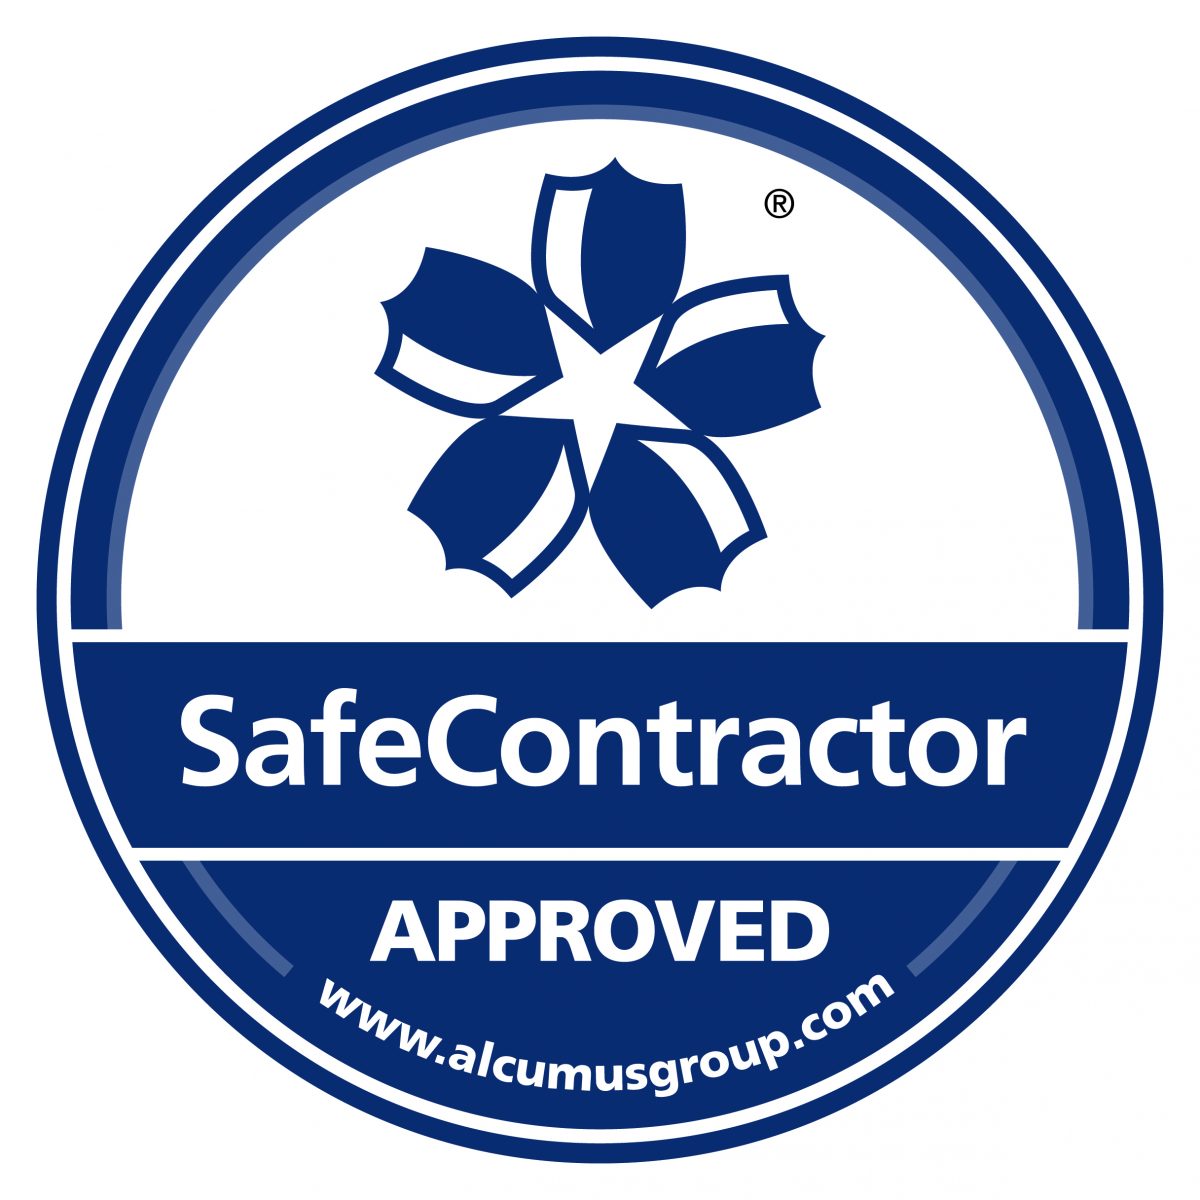 Safecontractor safe contractor approved hythe building services